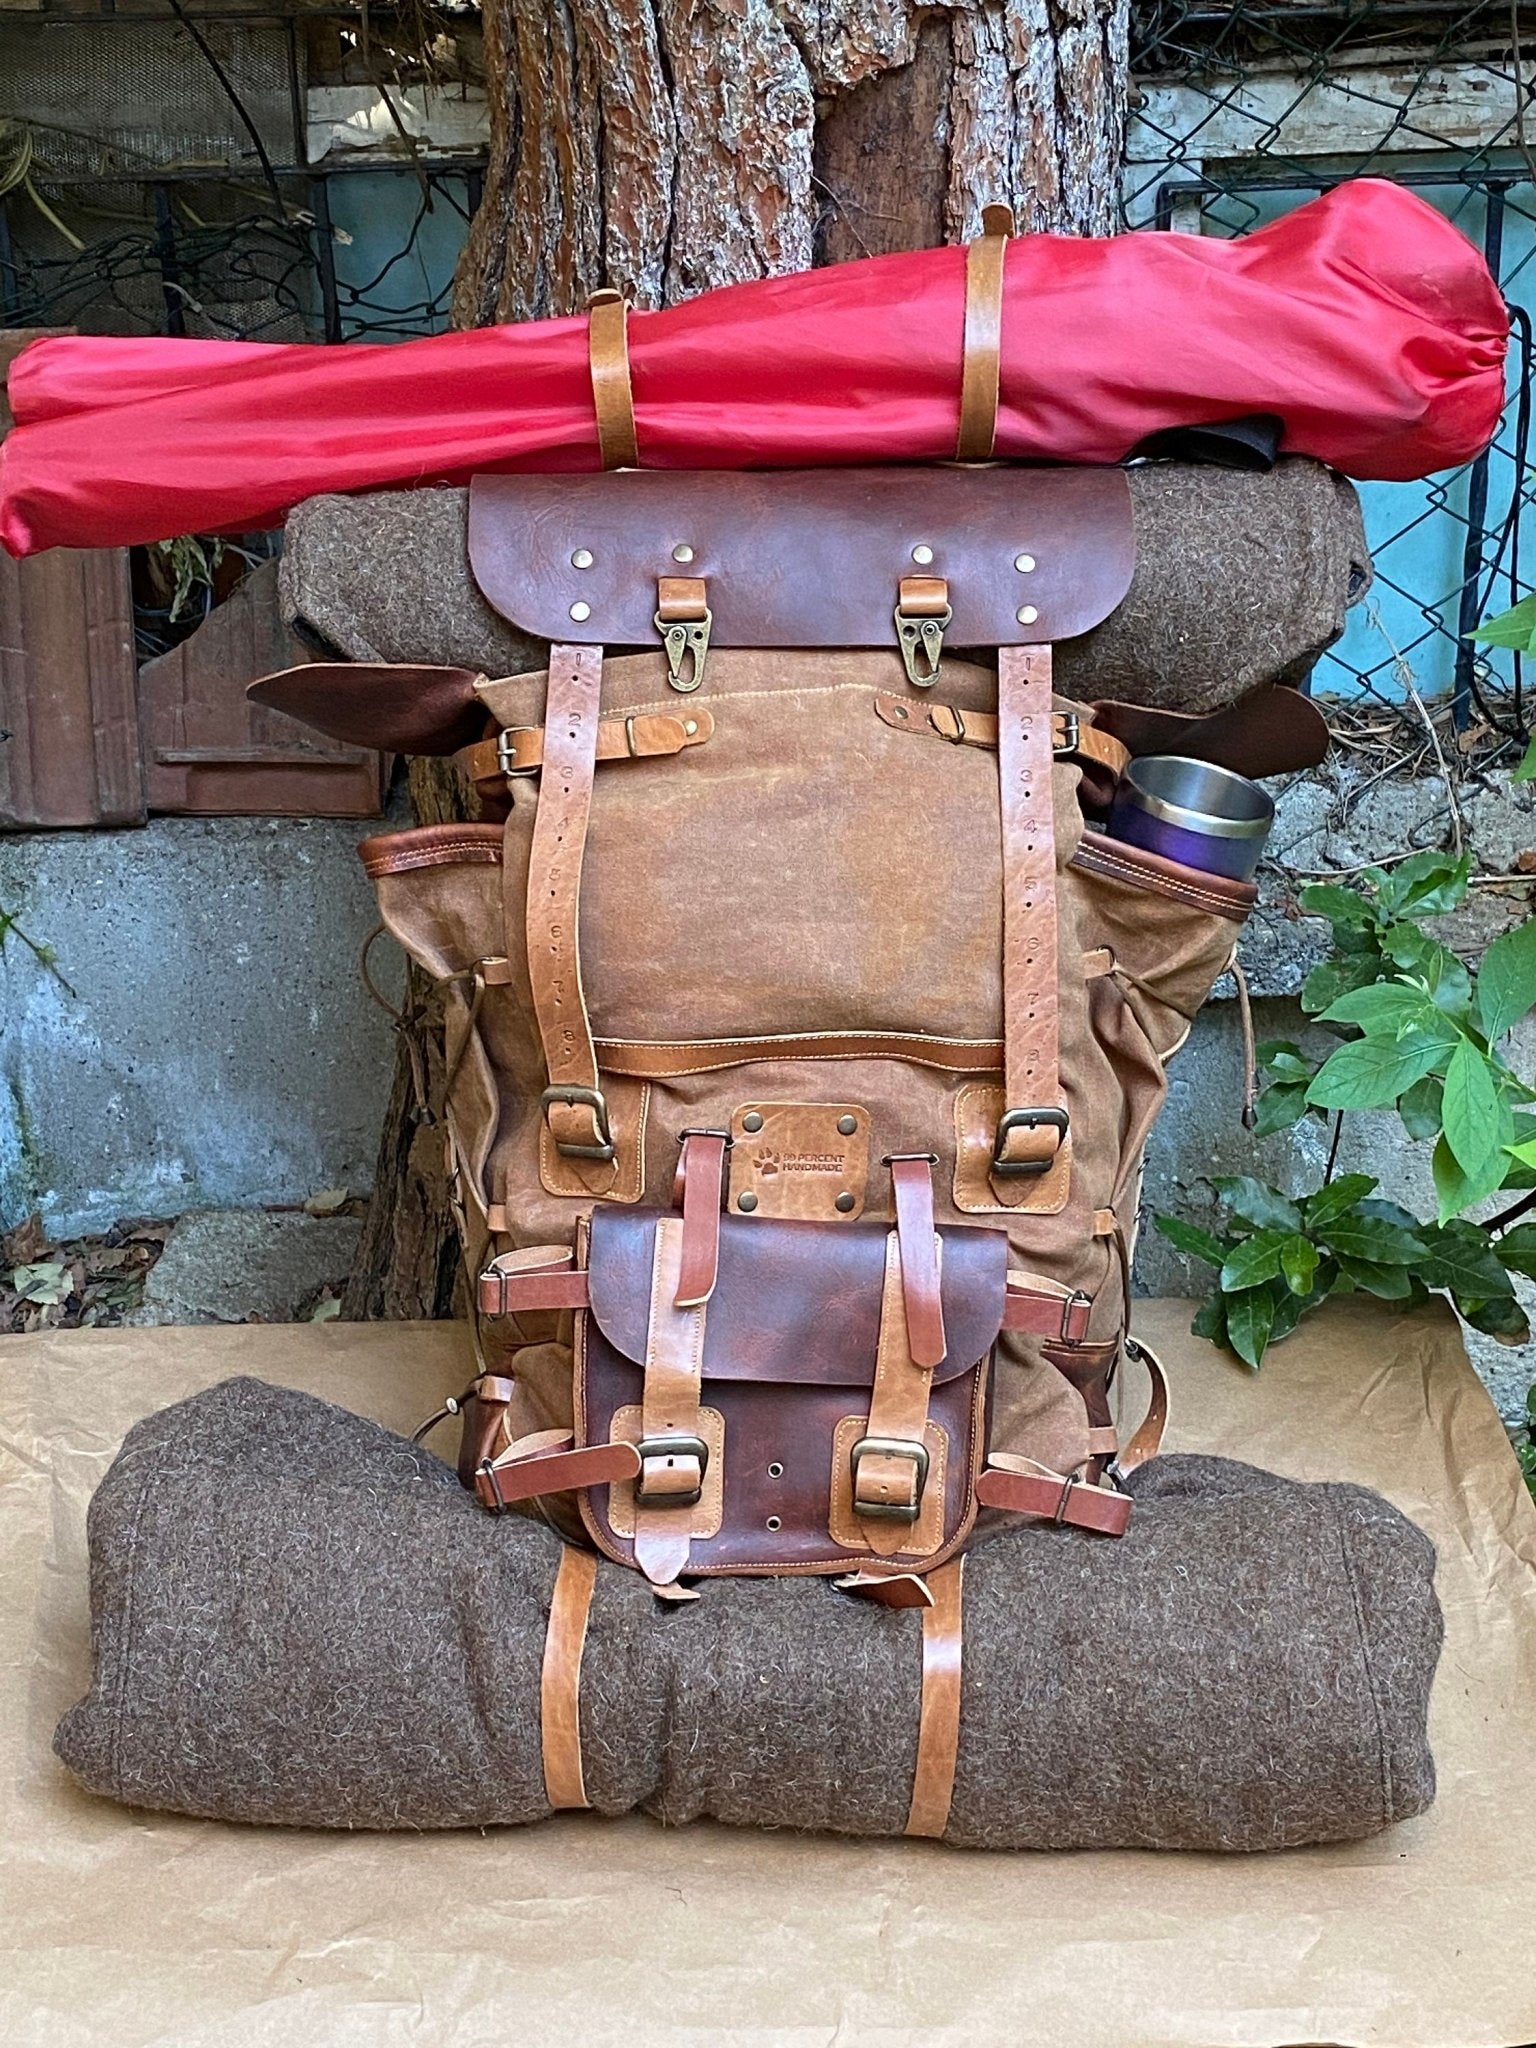 Leather Duffle Bags  High-Quality Handcrafted Leather Bags